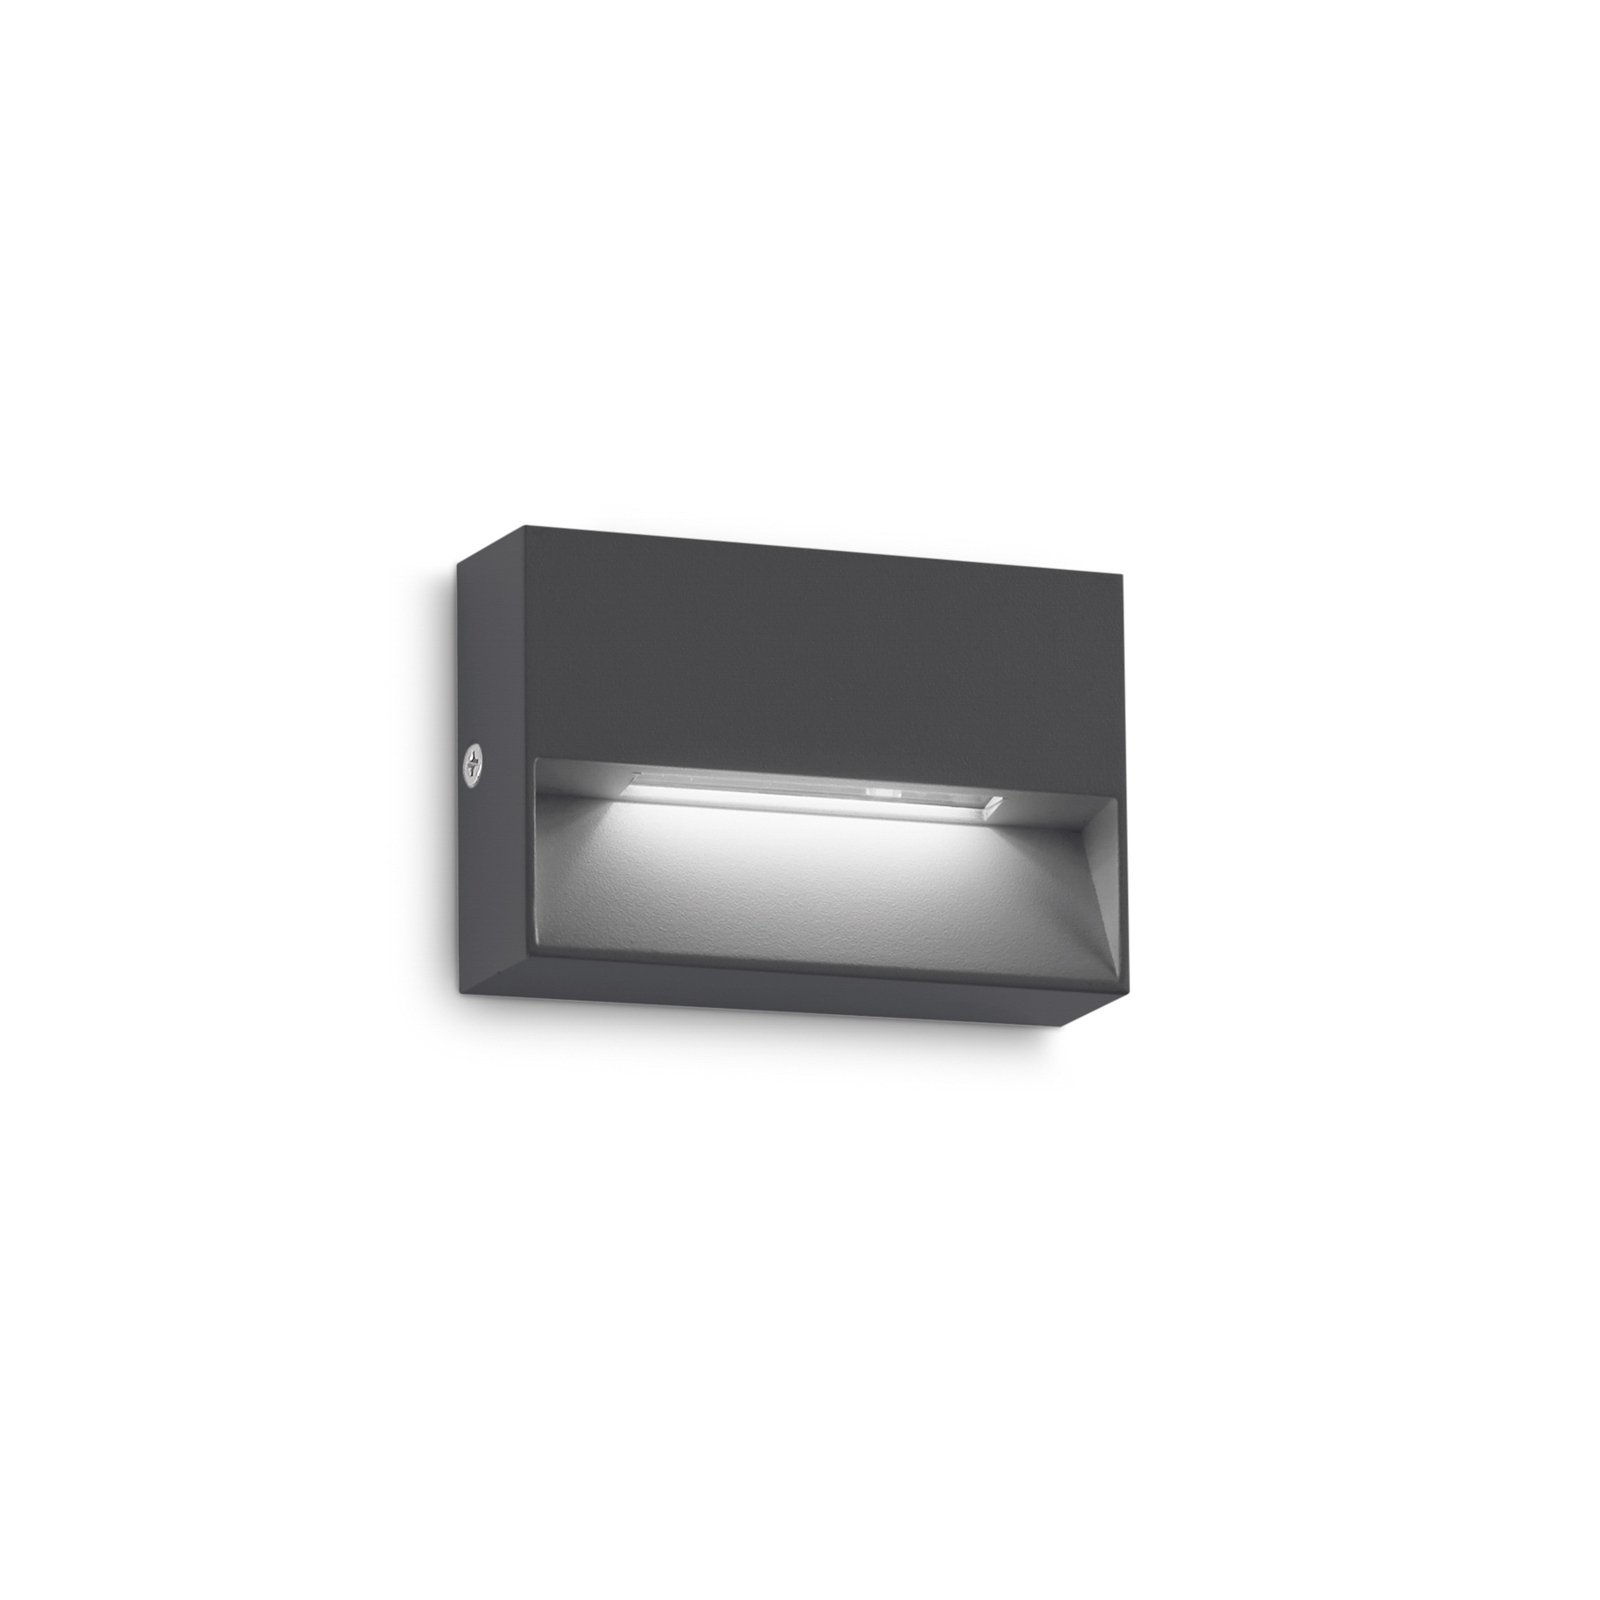 Ideal Lux LED outdoor wall light Dedra, anthracite, 10 x 6.5 cm